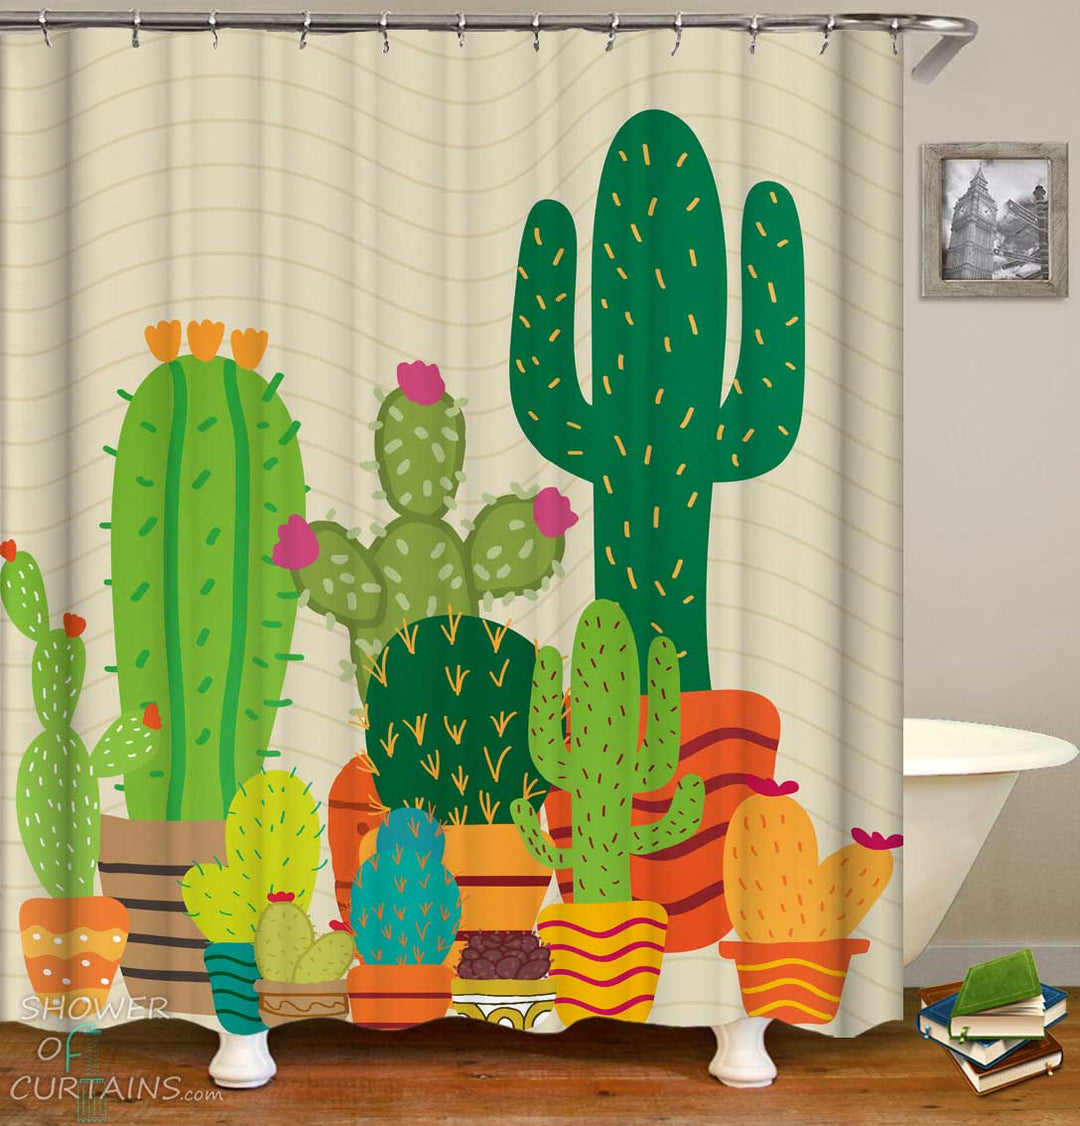 Shower Curtains with Multi Colored Cactus Drawing